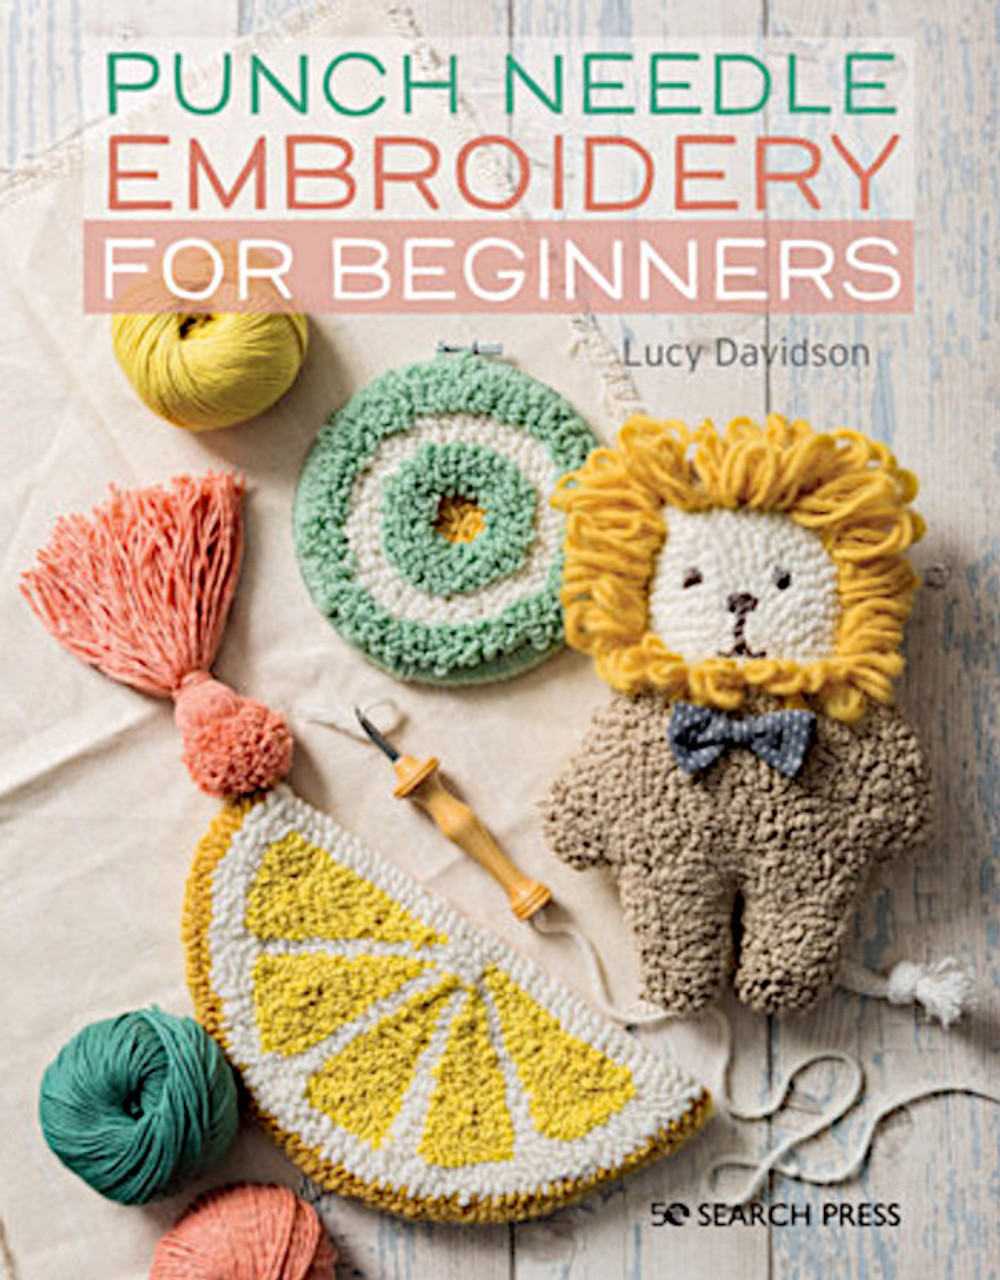 Punch Needle Embroidery for Beginners - The Websters